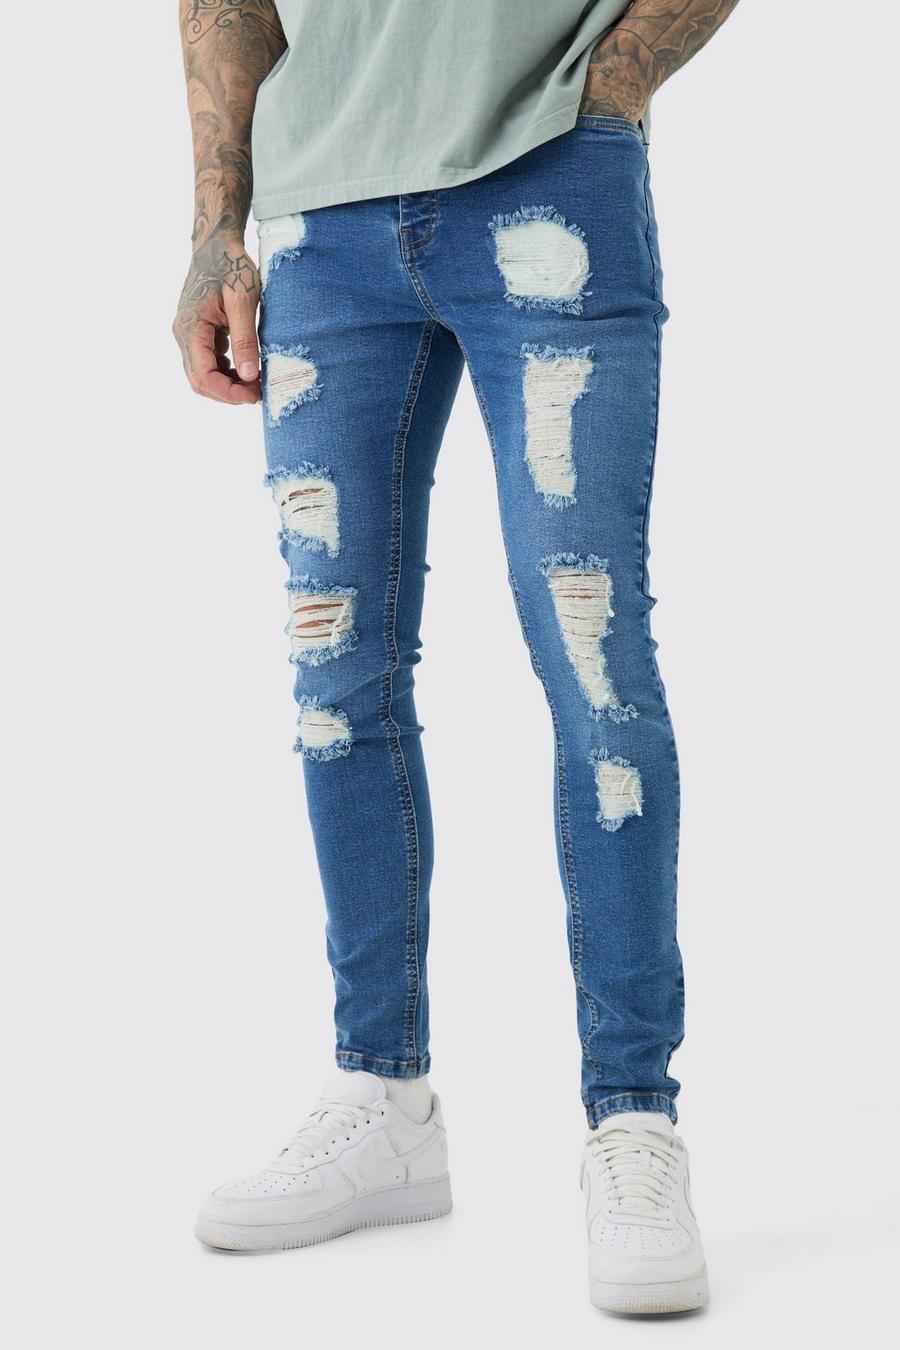 Jeans Tall Skinny Fit Stretch con strappi all over, Bleach wash